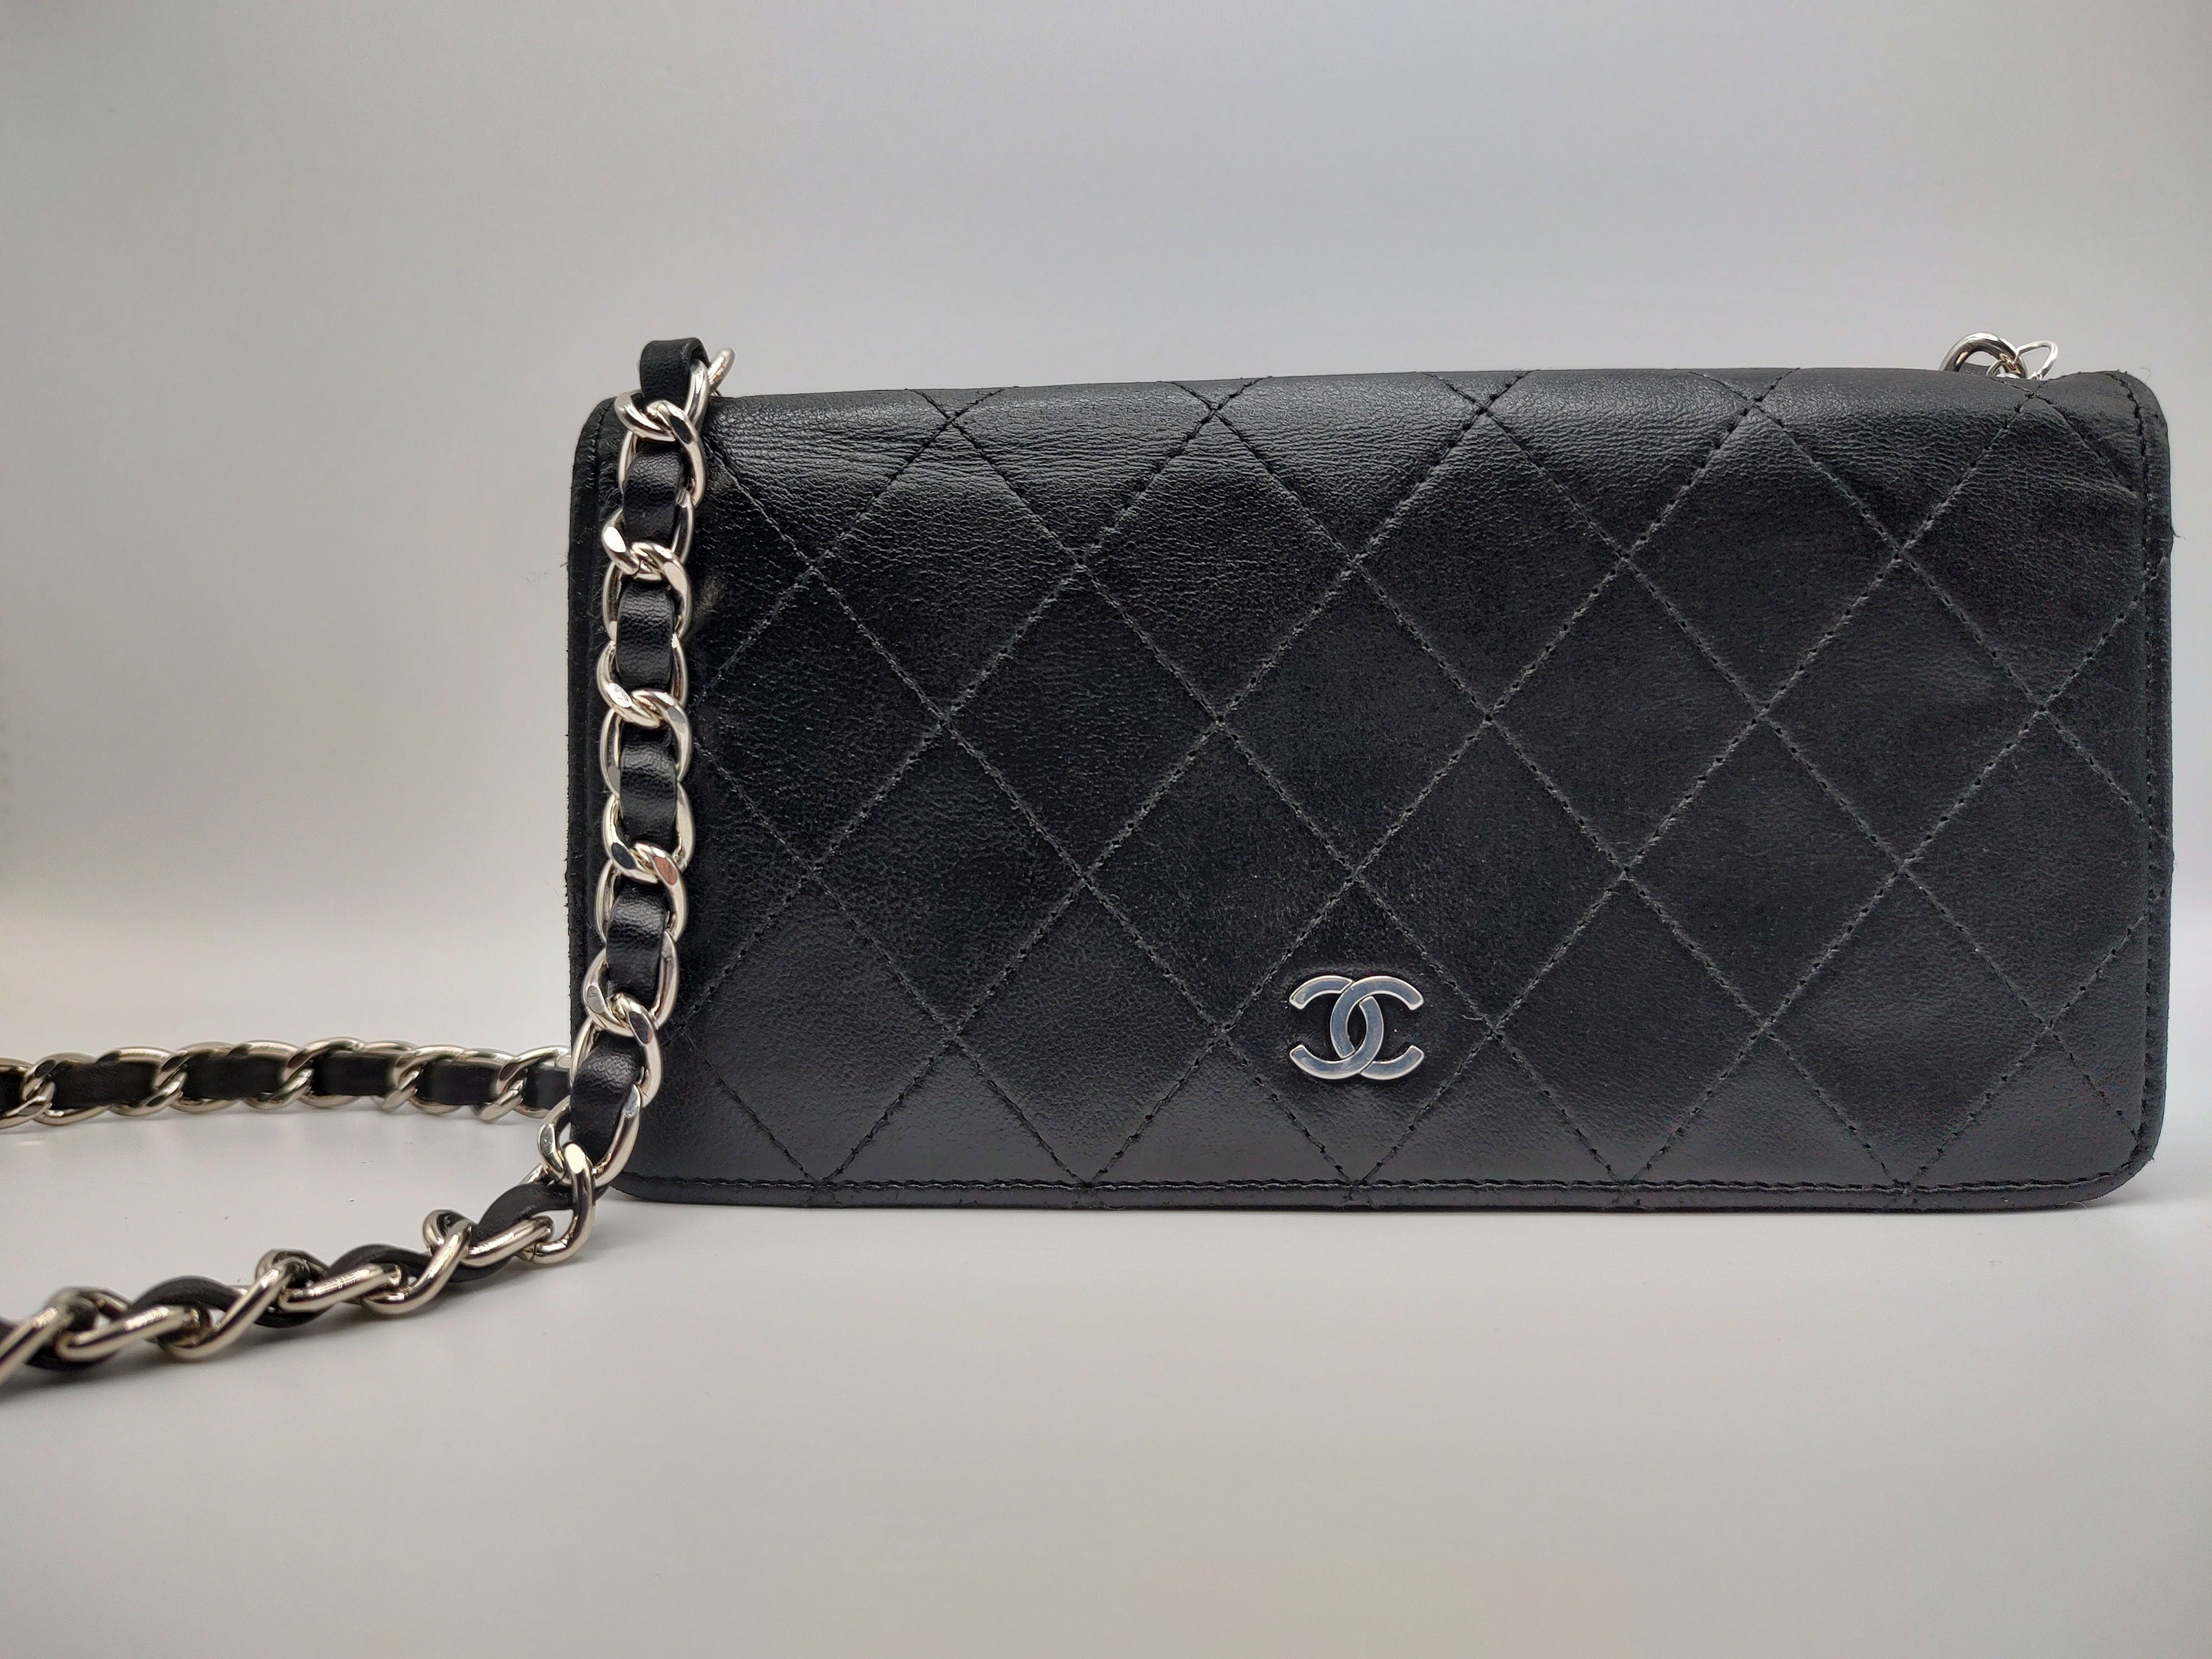 BUYING A PRELOVED CHANEL HANDBAG TIPS  TRICKS  WHAT TO LOOK FOR   YouTube